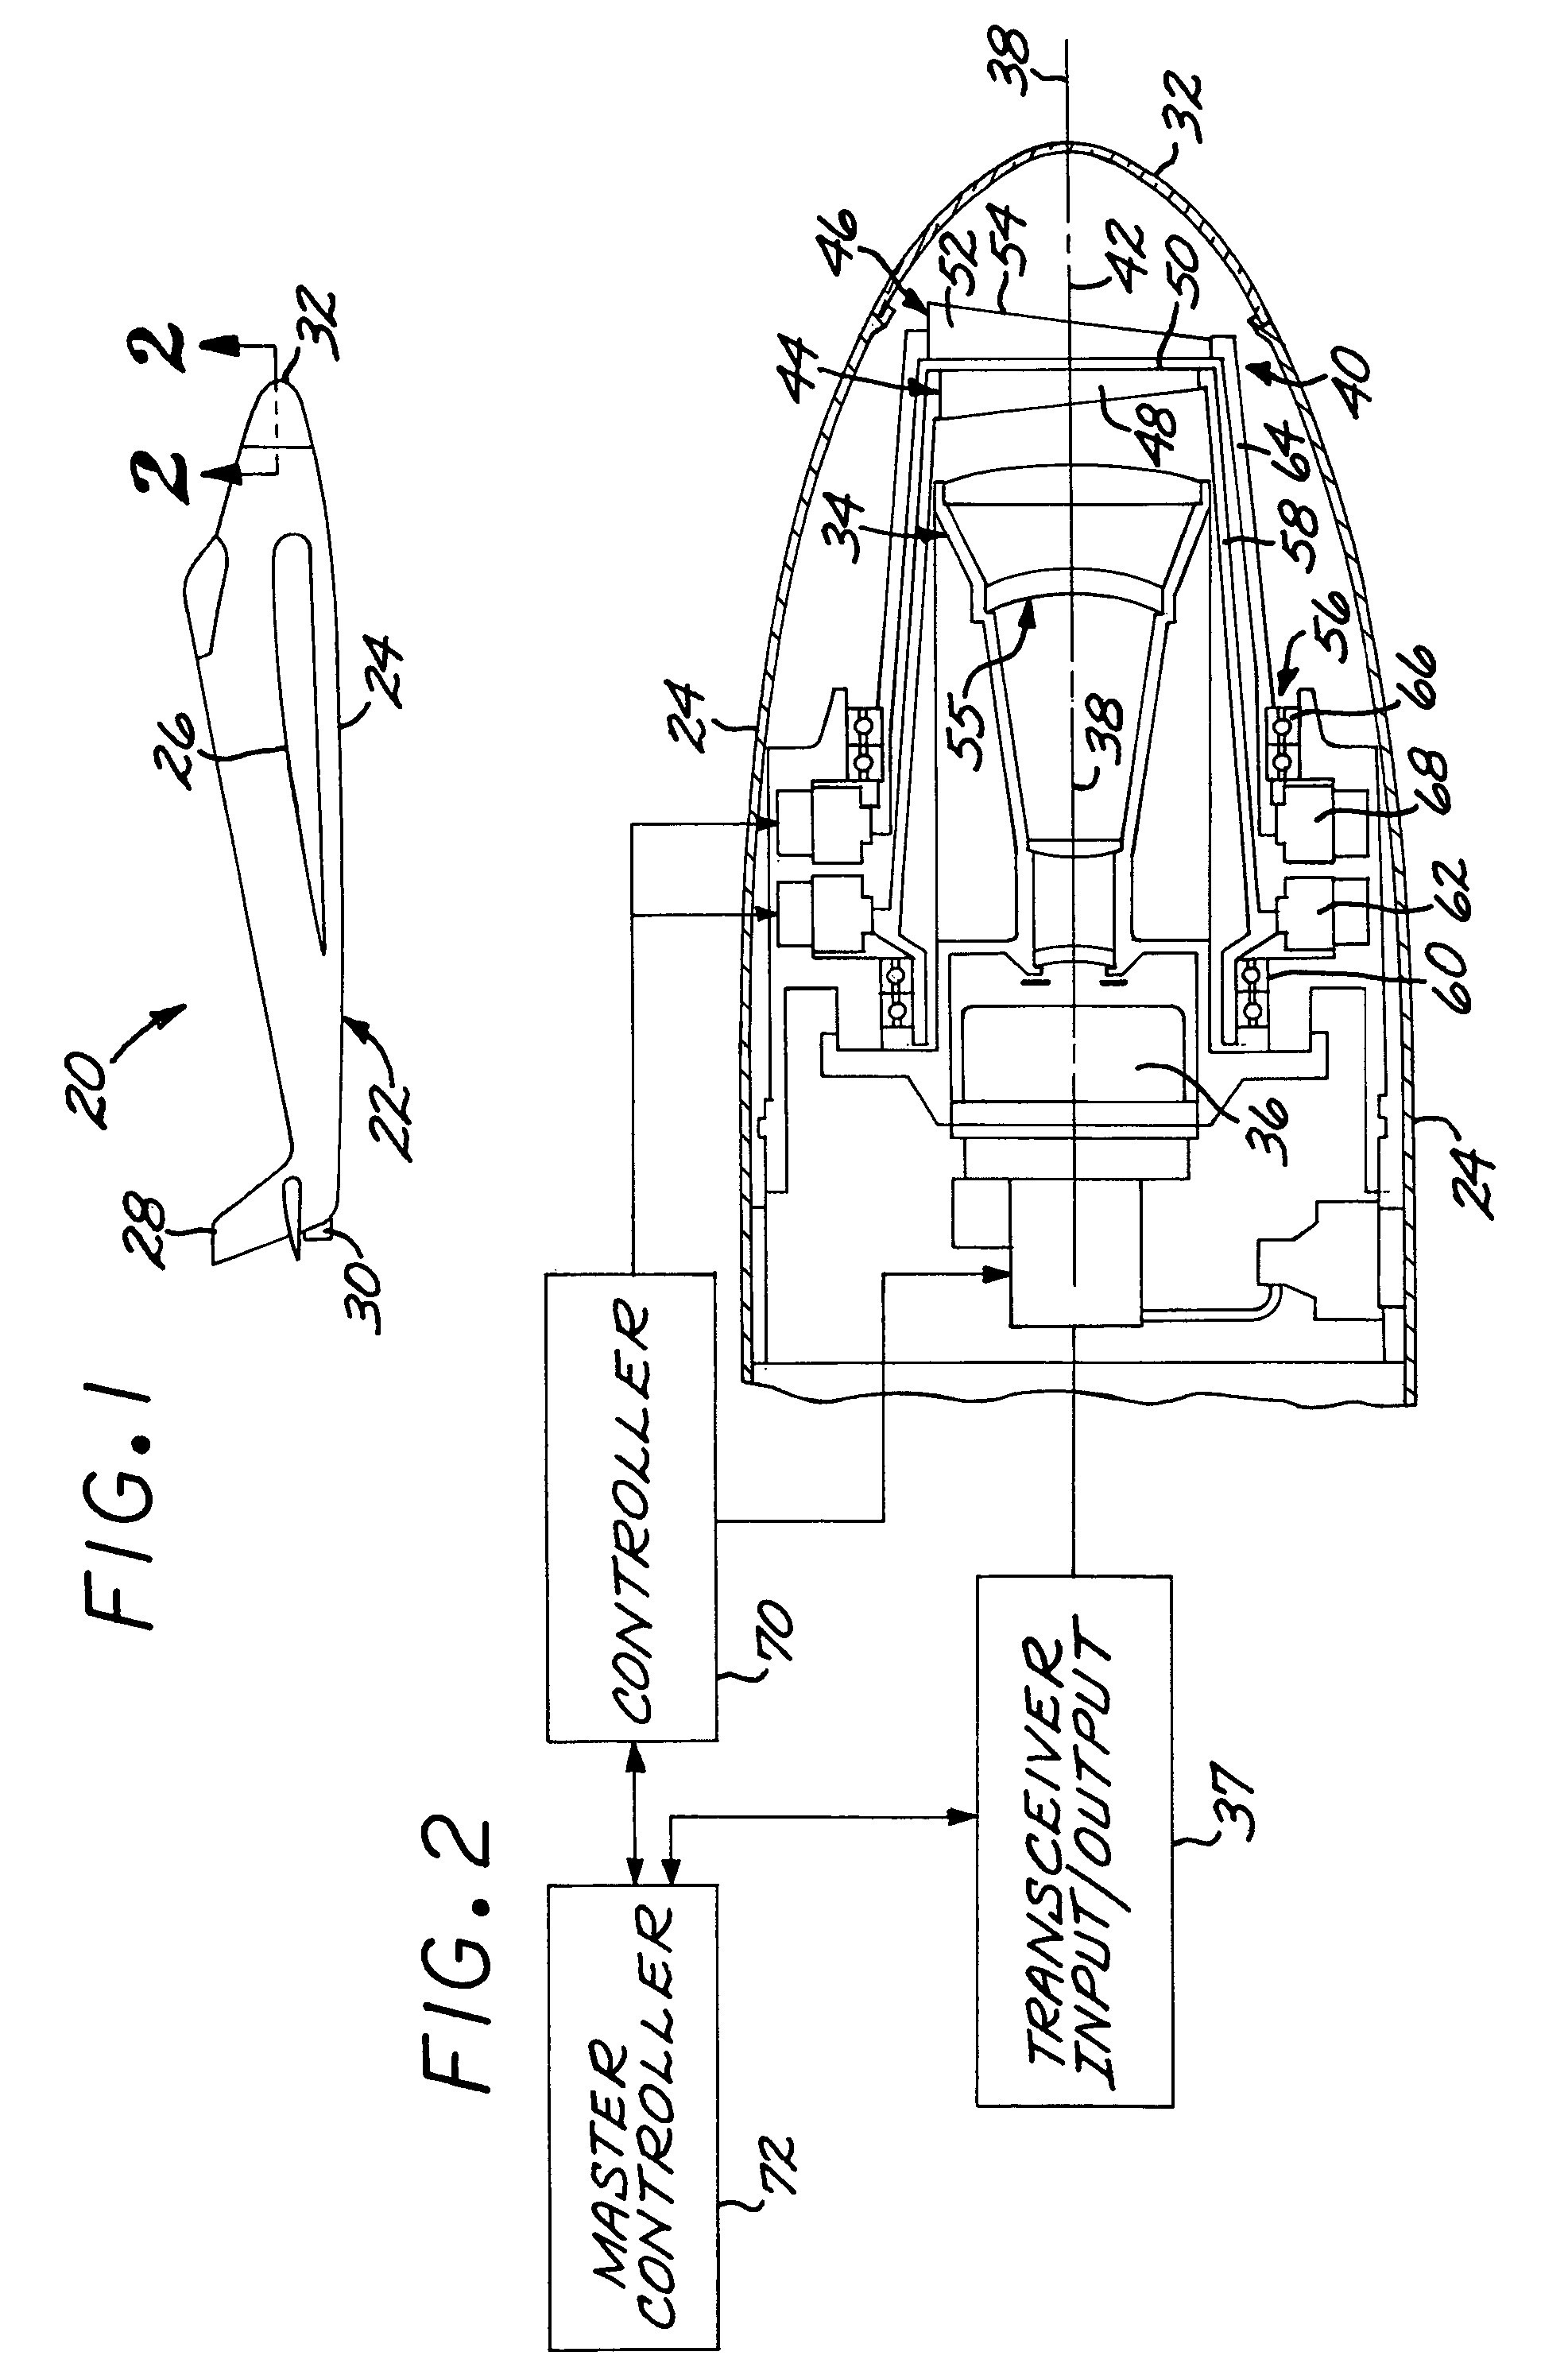 Optical device with a steerable light path